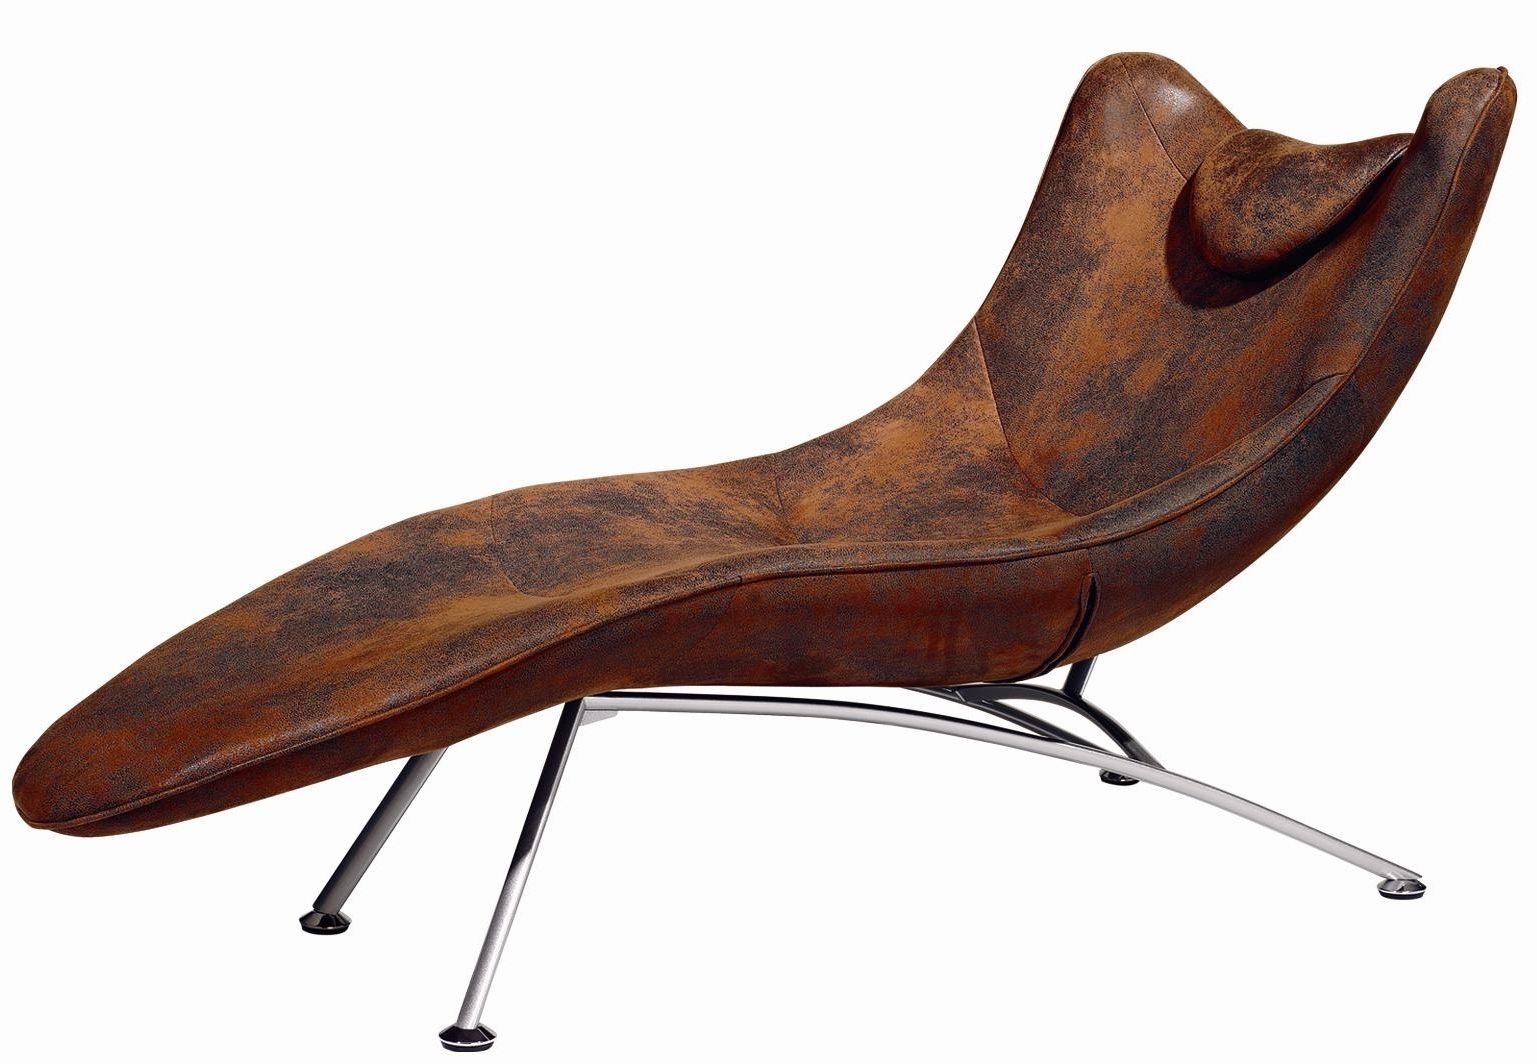 Brown Leather Chair With Pointed Bottom End Combined With Silver With Newest Small Chaise Lounge Chairs (View 11 of 15)